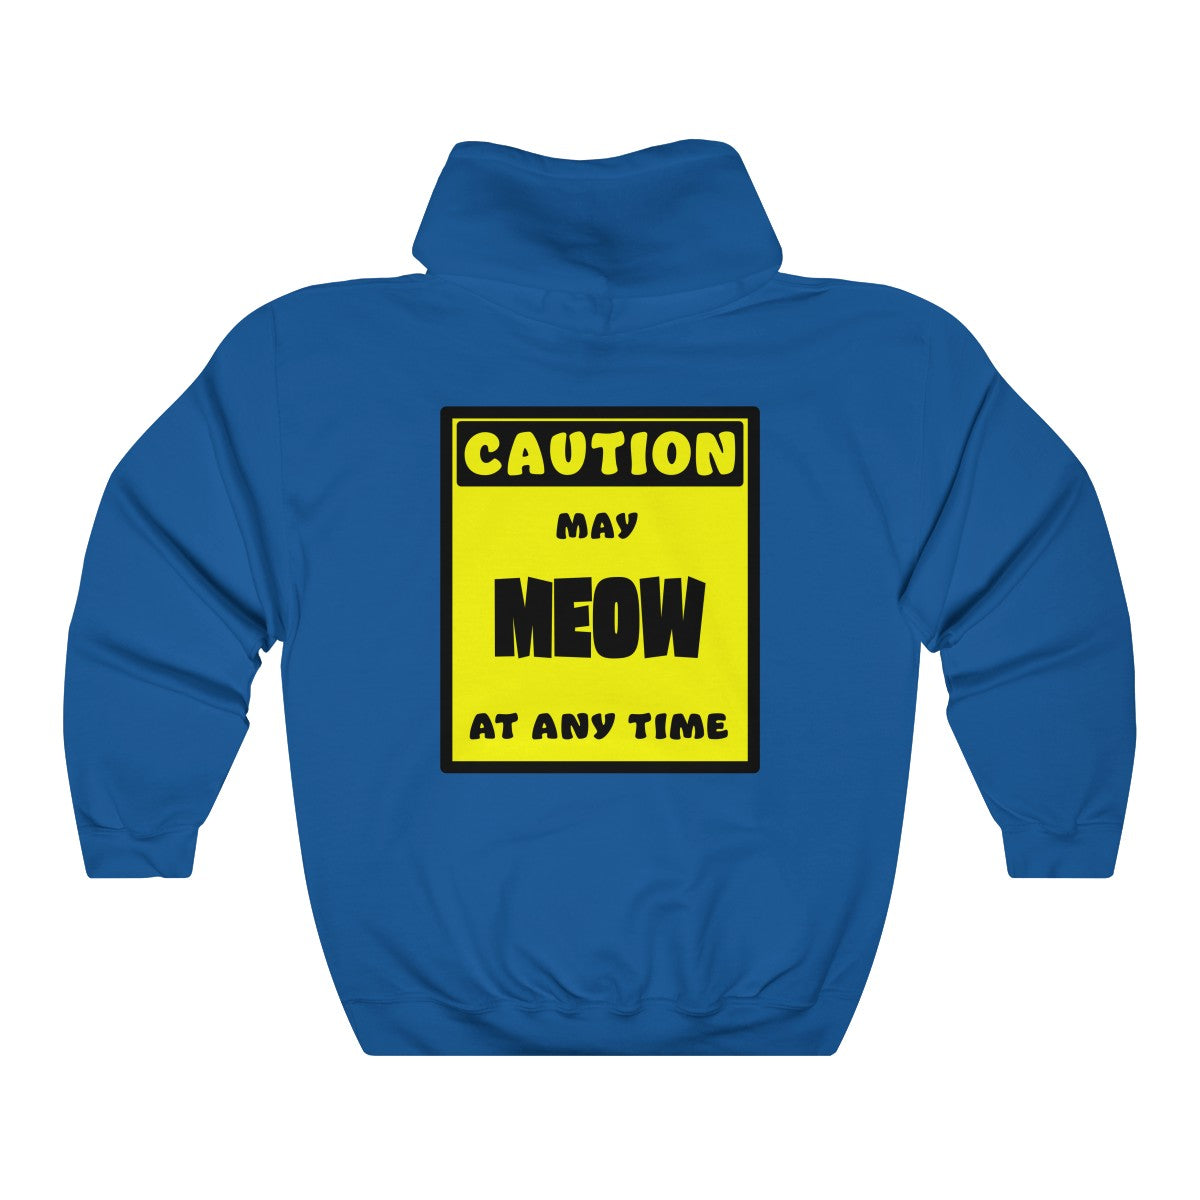 CAUTION! May MEOW at any time! - Hoodie Hoodie AFLT-Whootorca Royal Blue S 